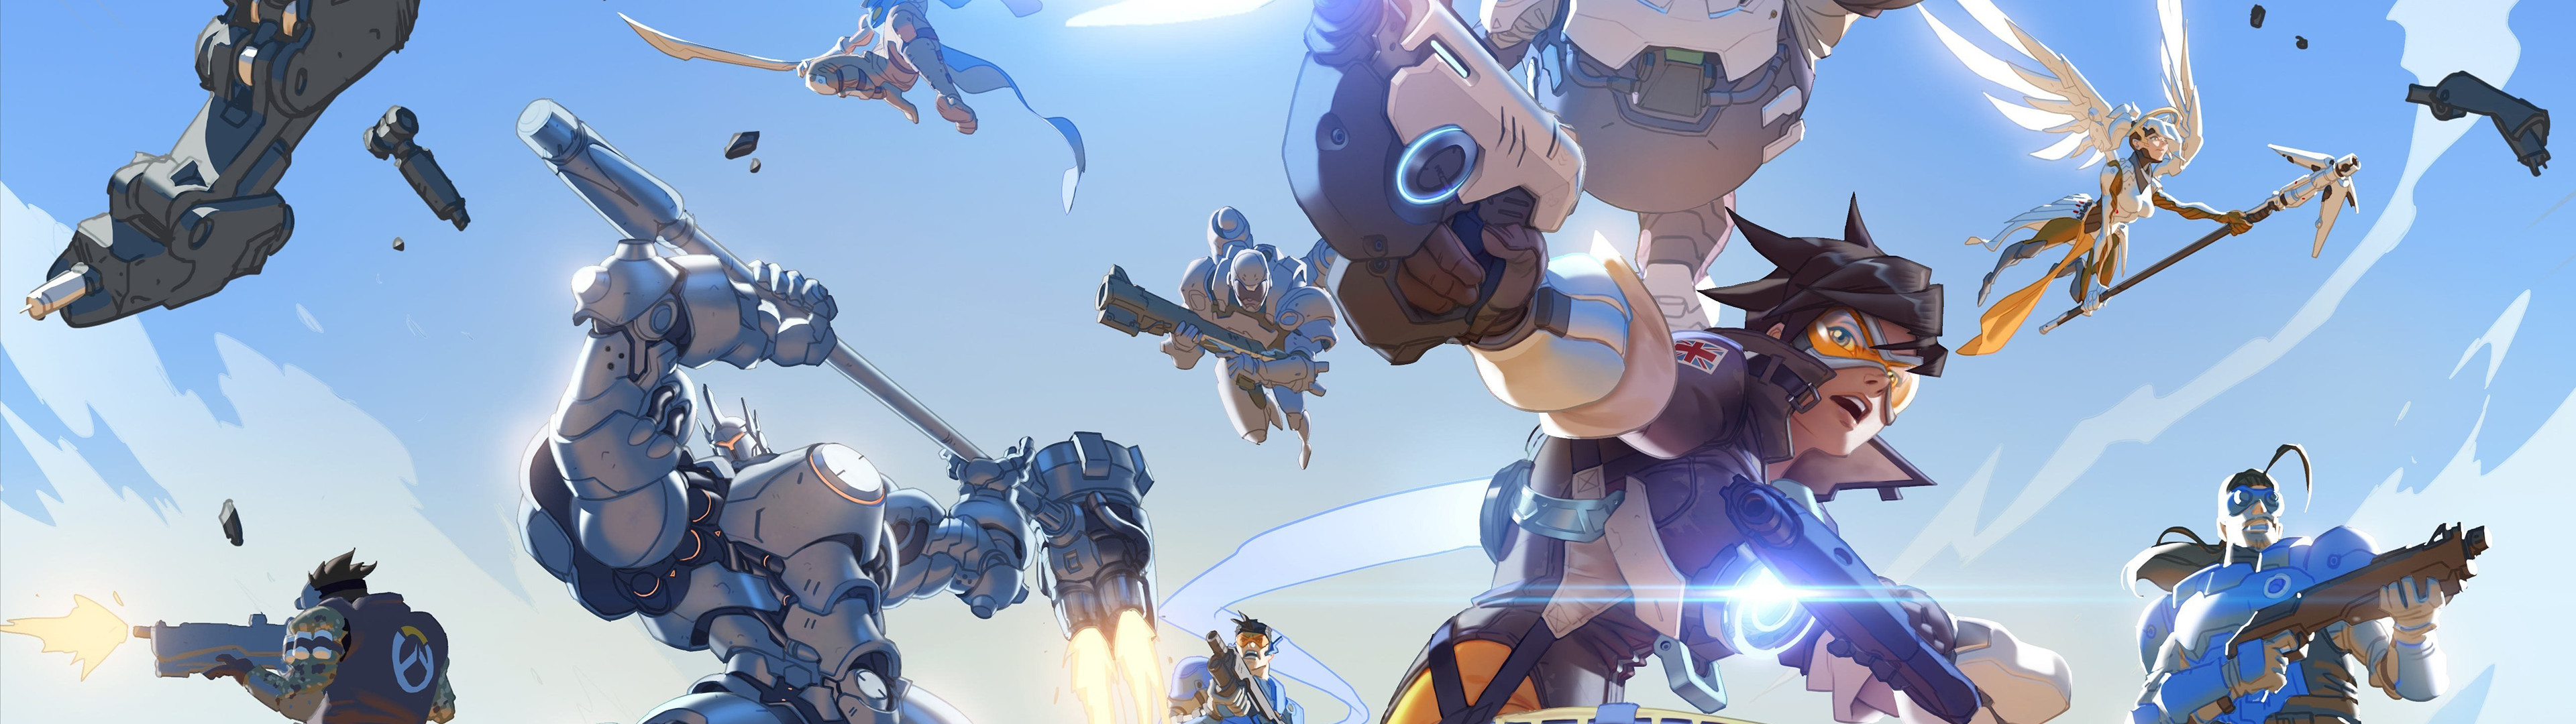 Overwatch Dual Wallpaper Free Overwatch Dual Background